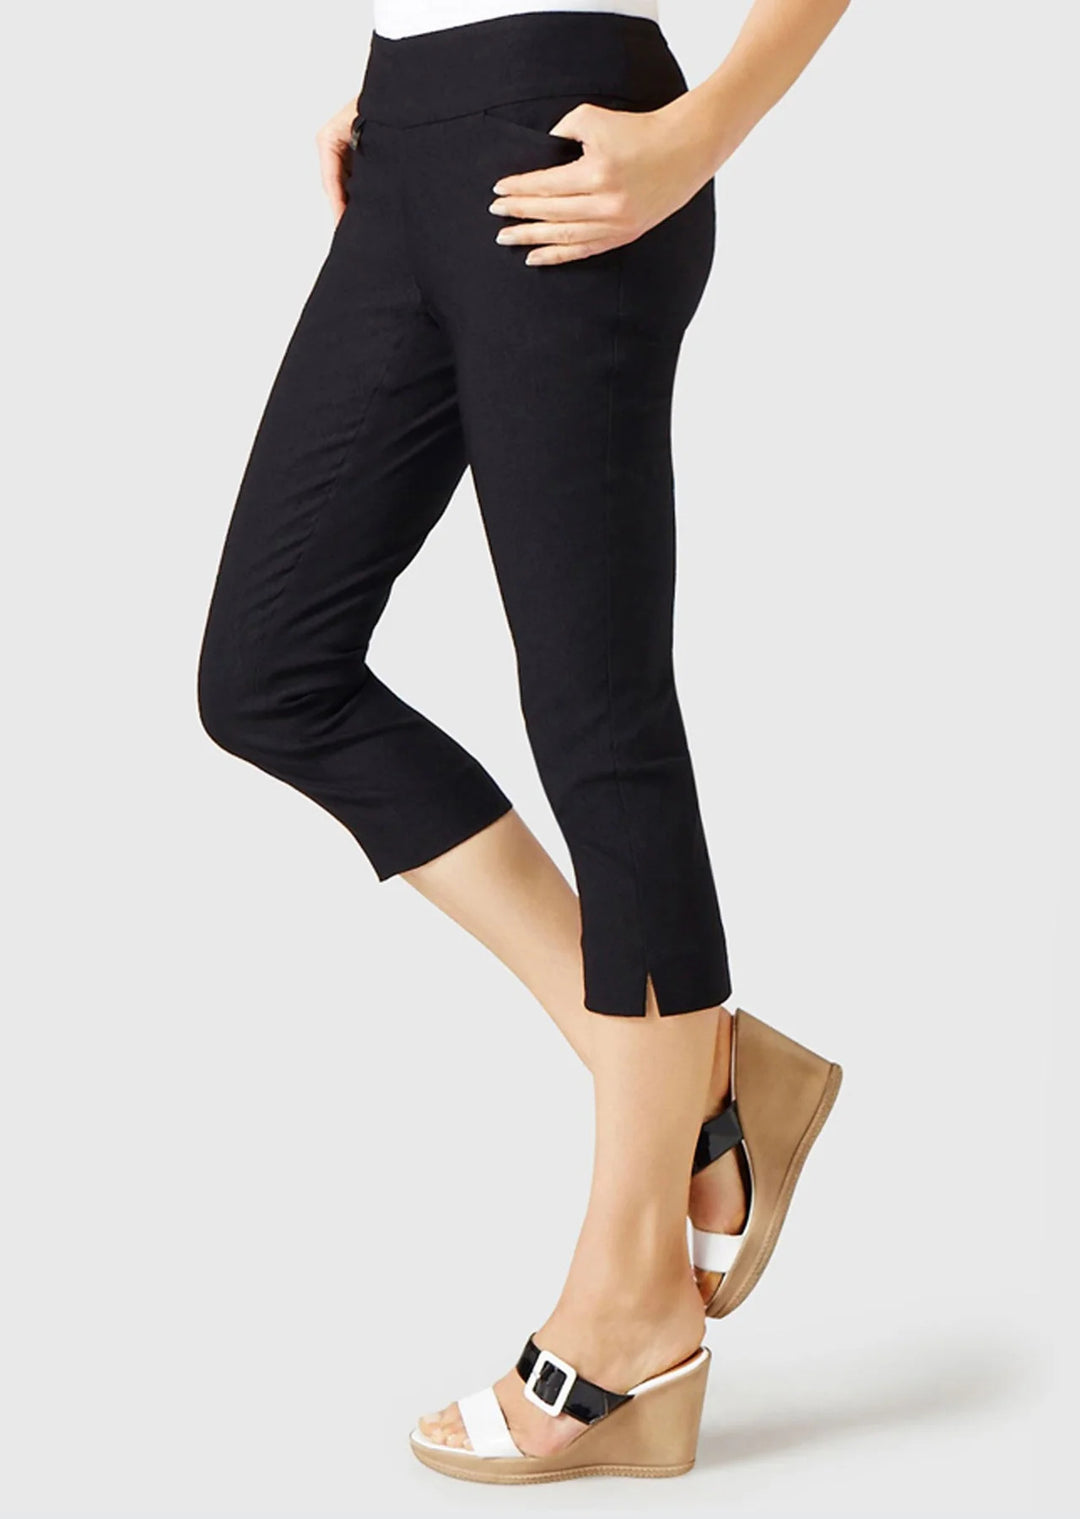 Classic Pull On Capri Pant With Pockets